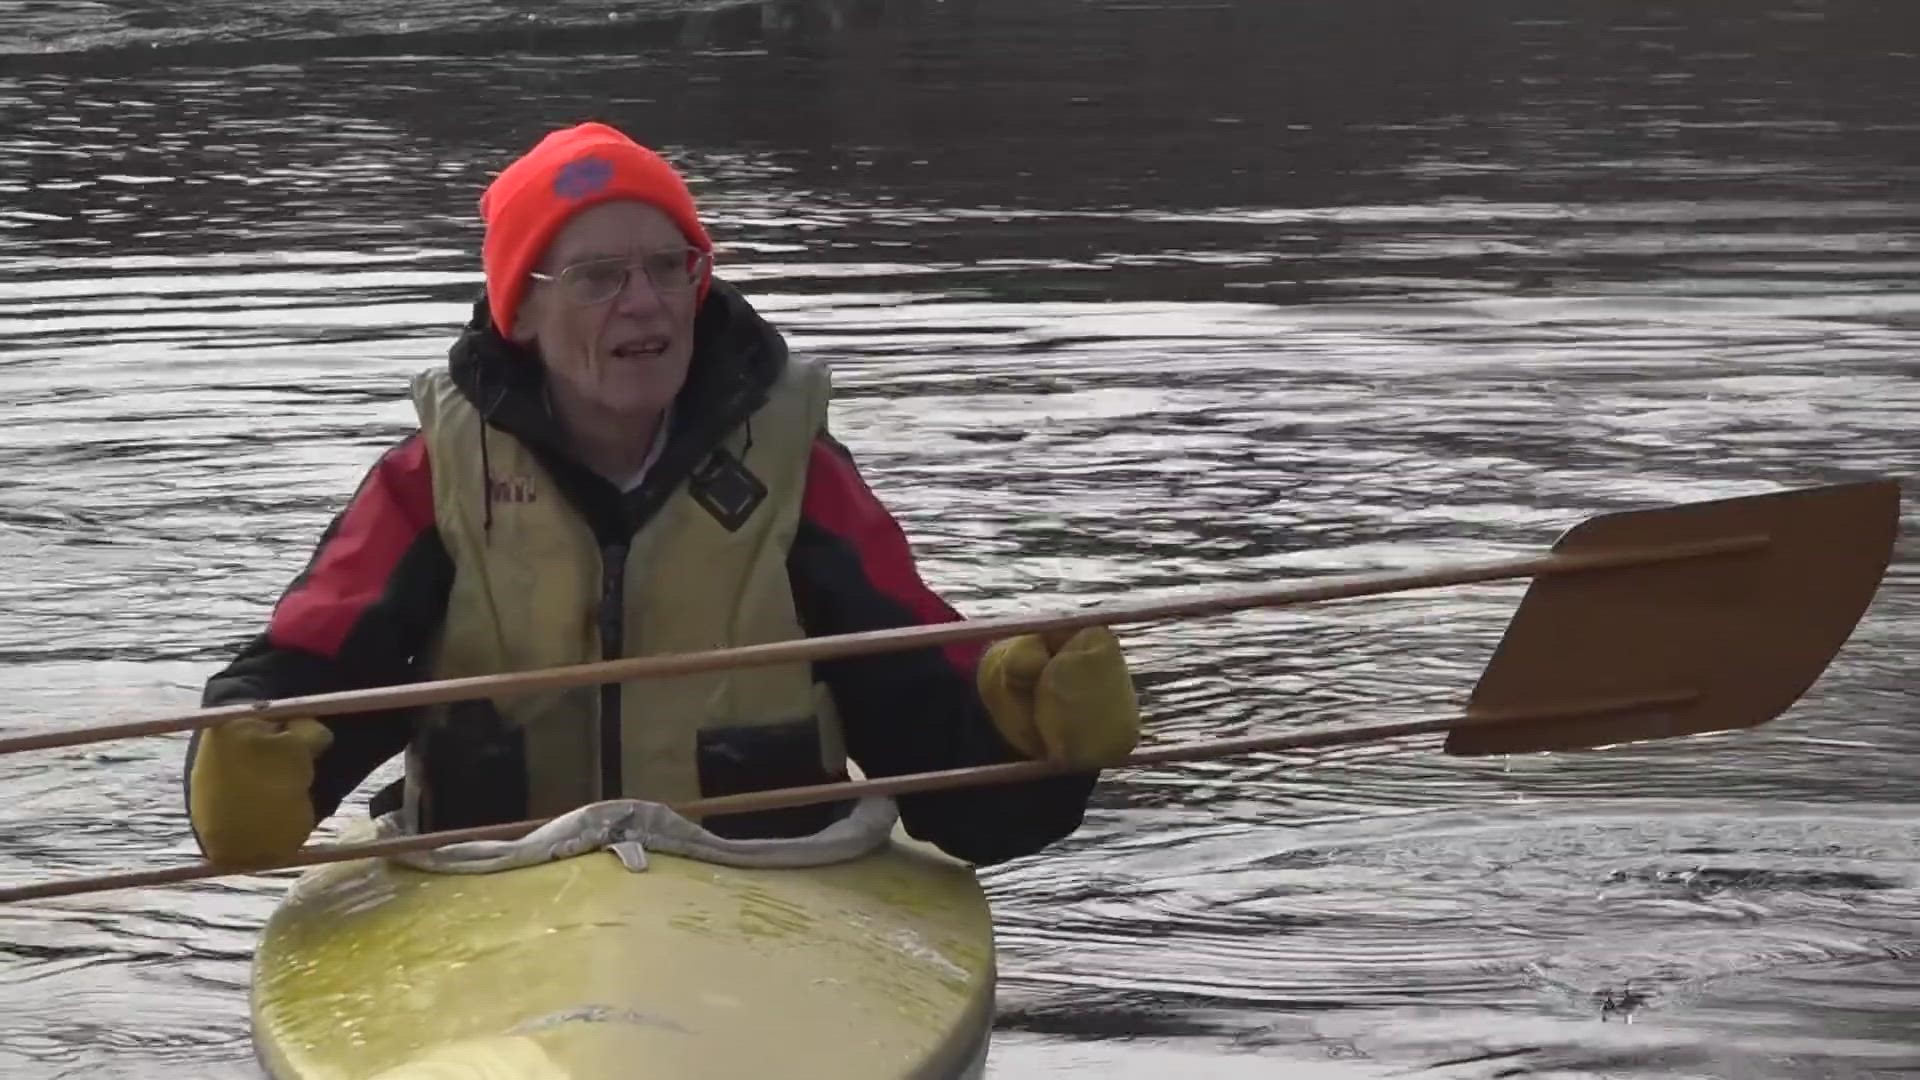 At least once every month for the last three decades, Larry Merrill has kayaked with his handmade paddles.